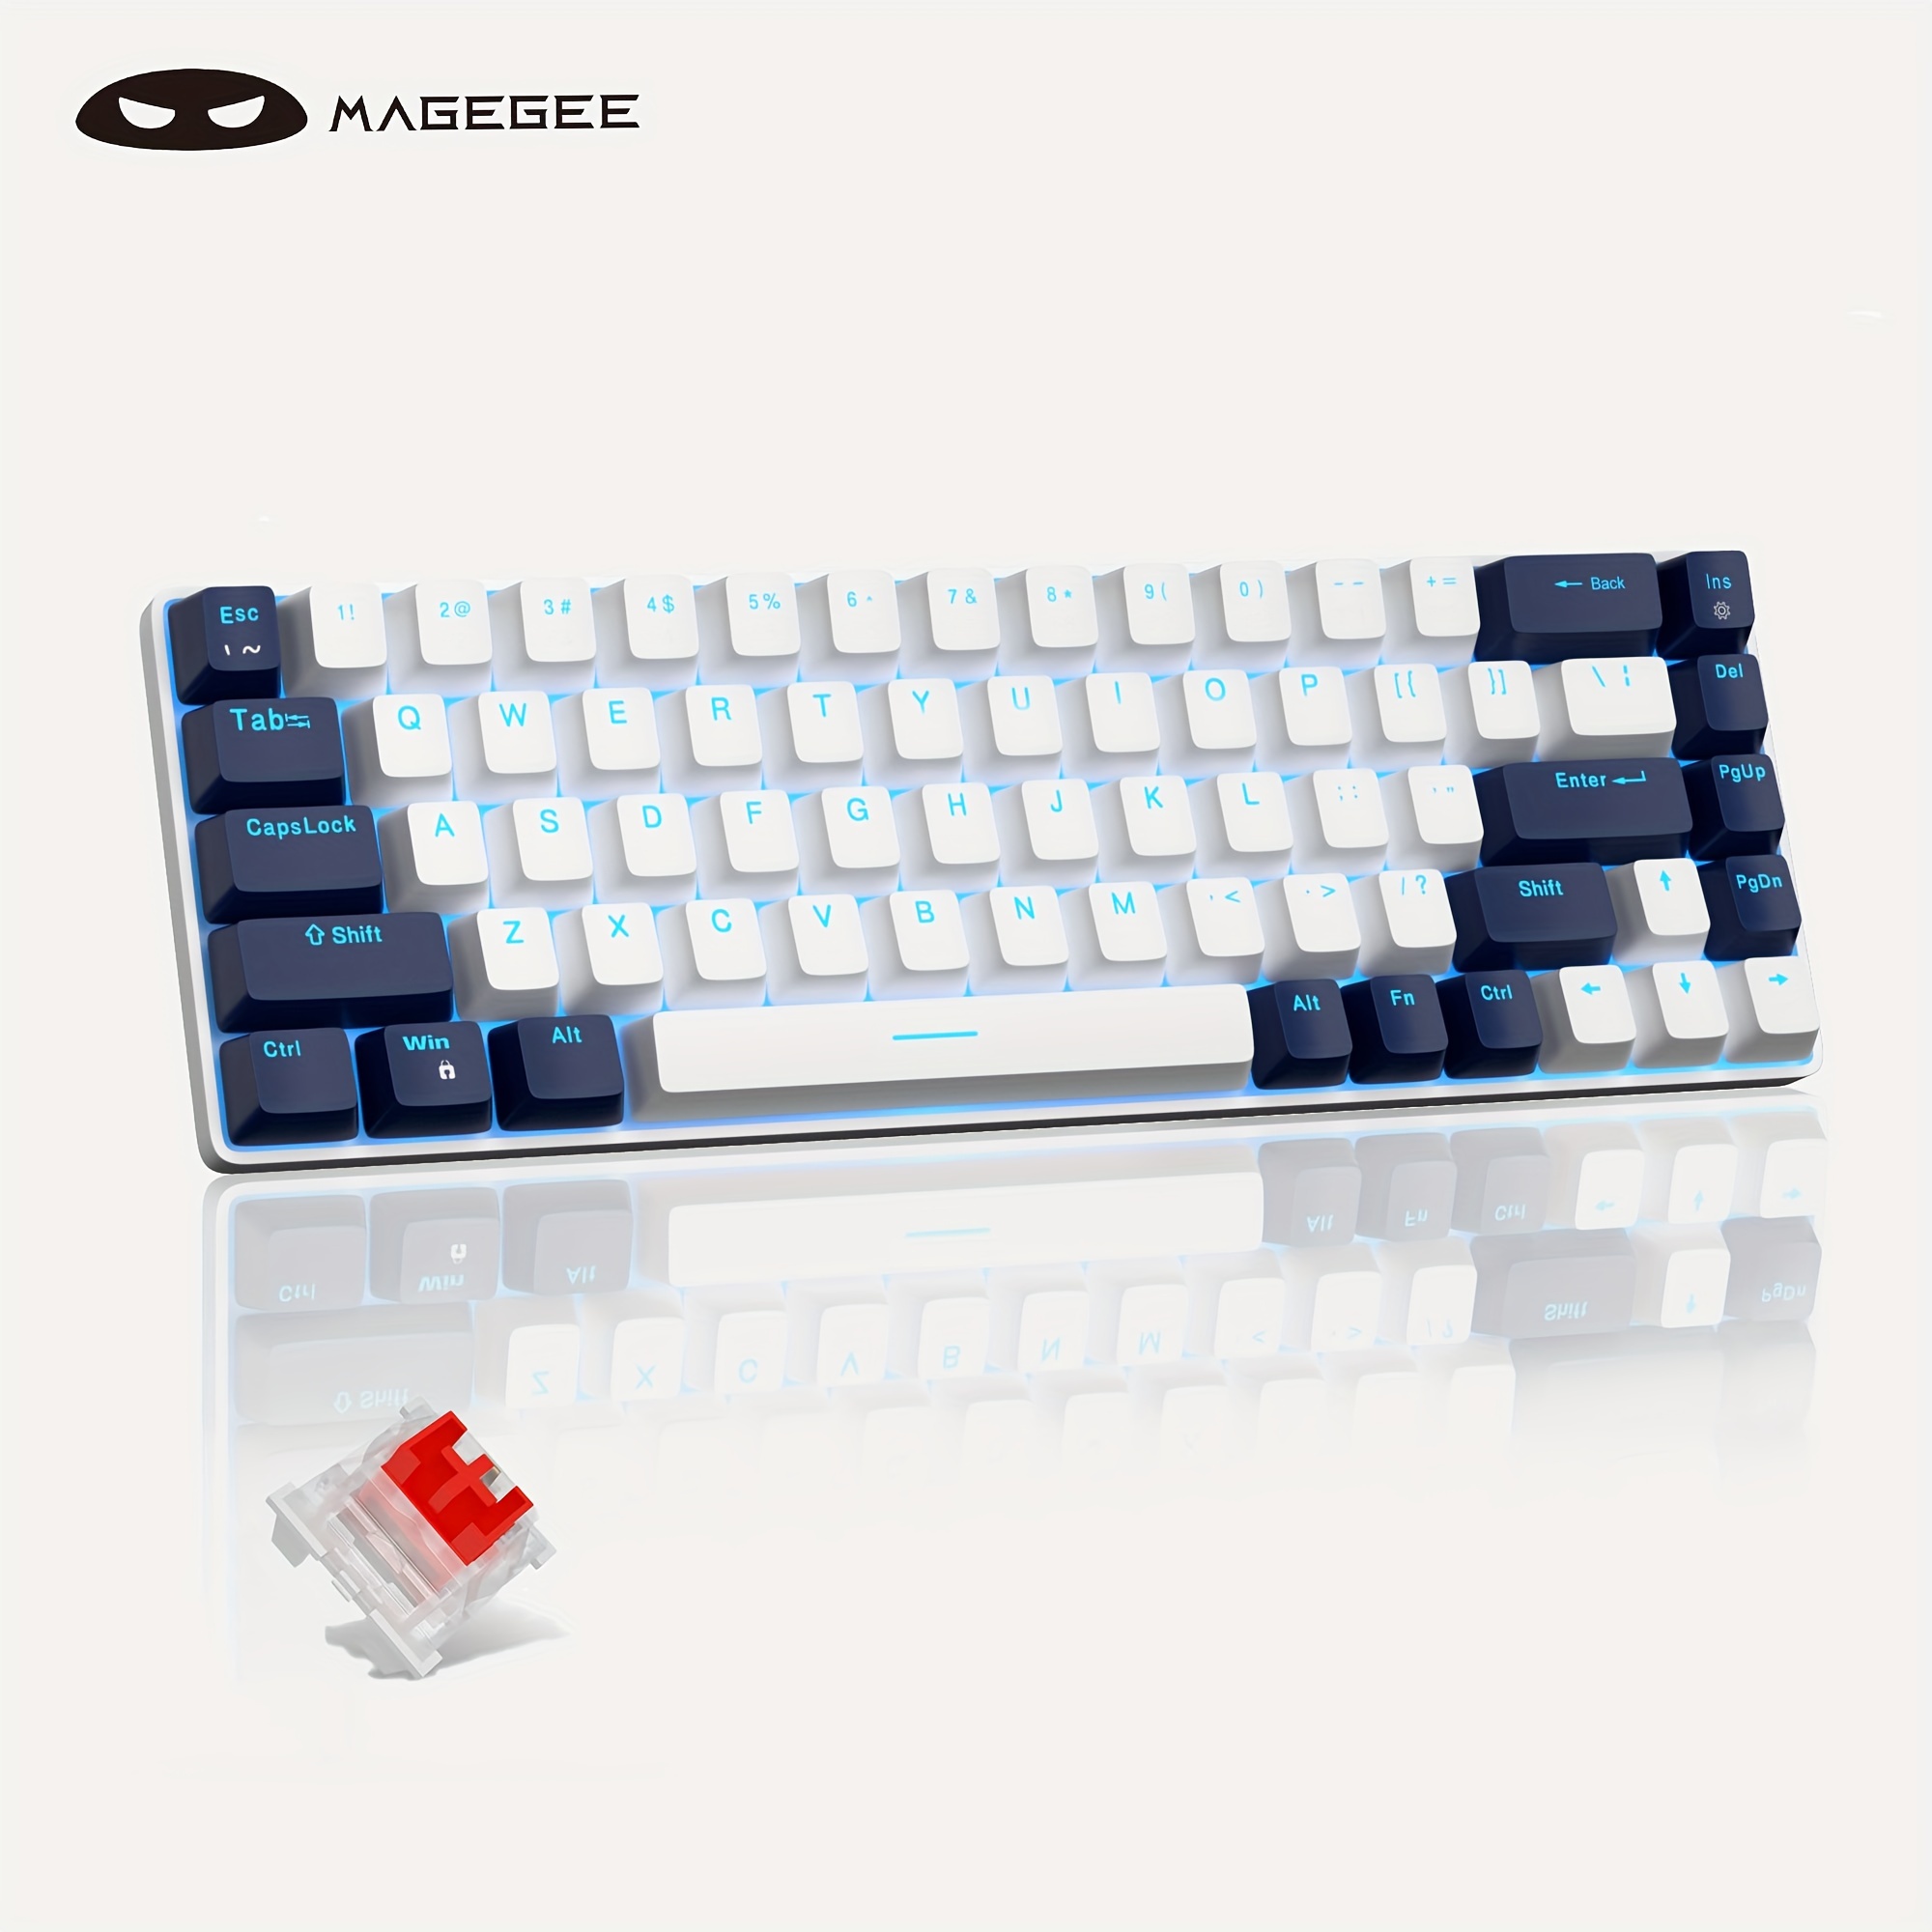 

Portable 60% Mechanical Gaming Keyboard, Mk-box Led-backlit Compact 68-key Mini Wired Office Keyboard For Windows Laptops And - (blue White)